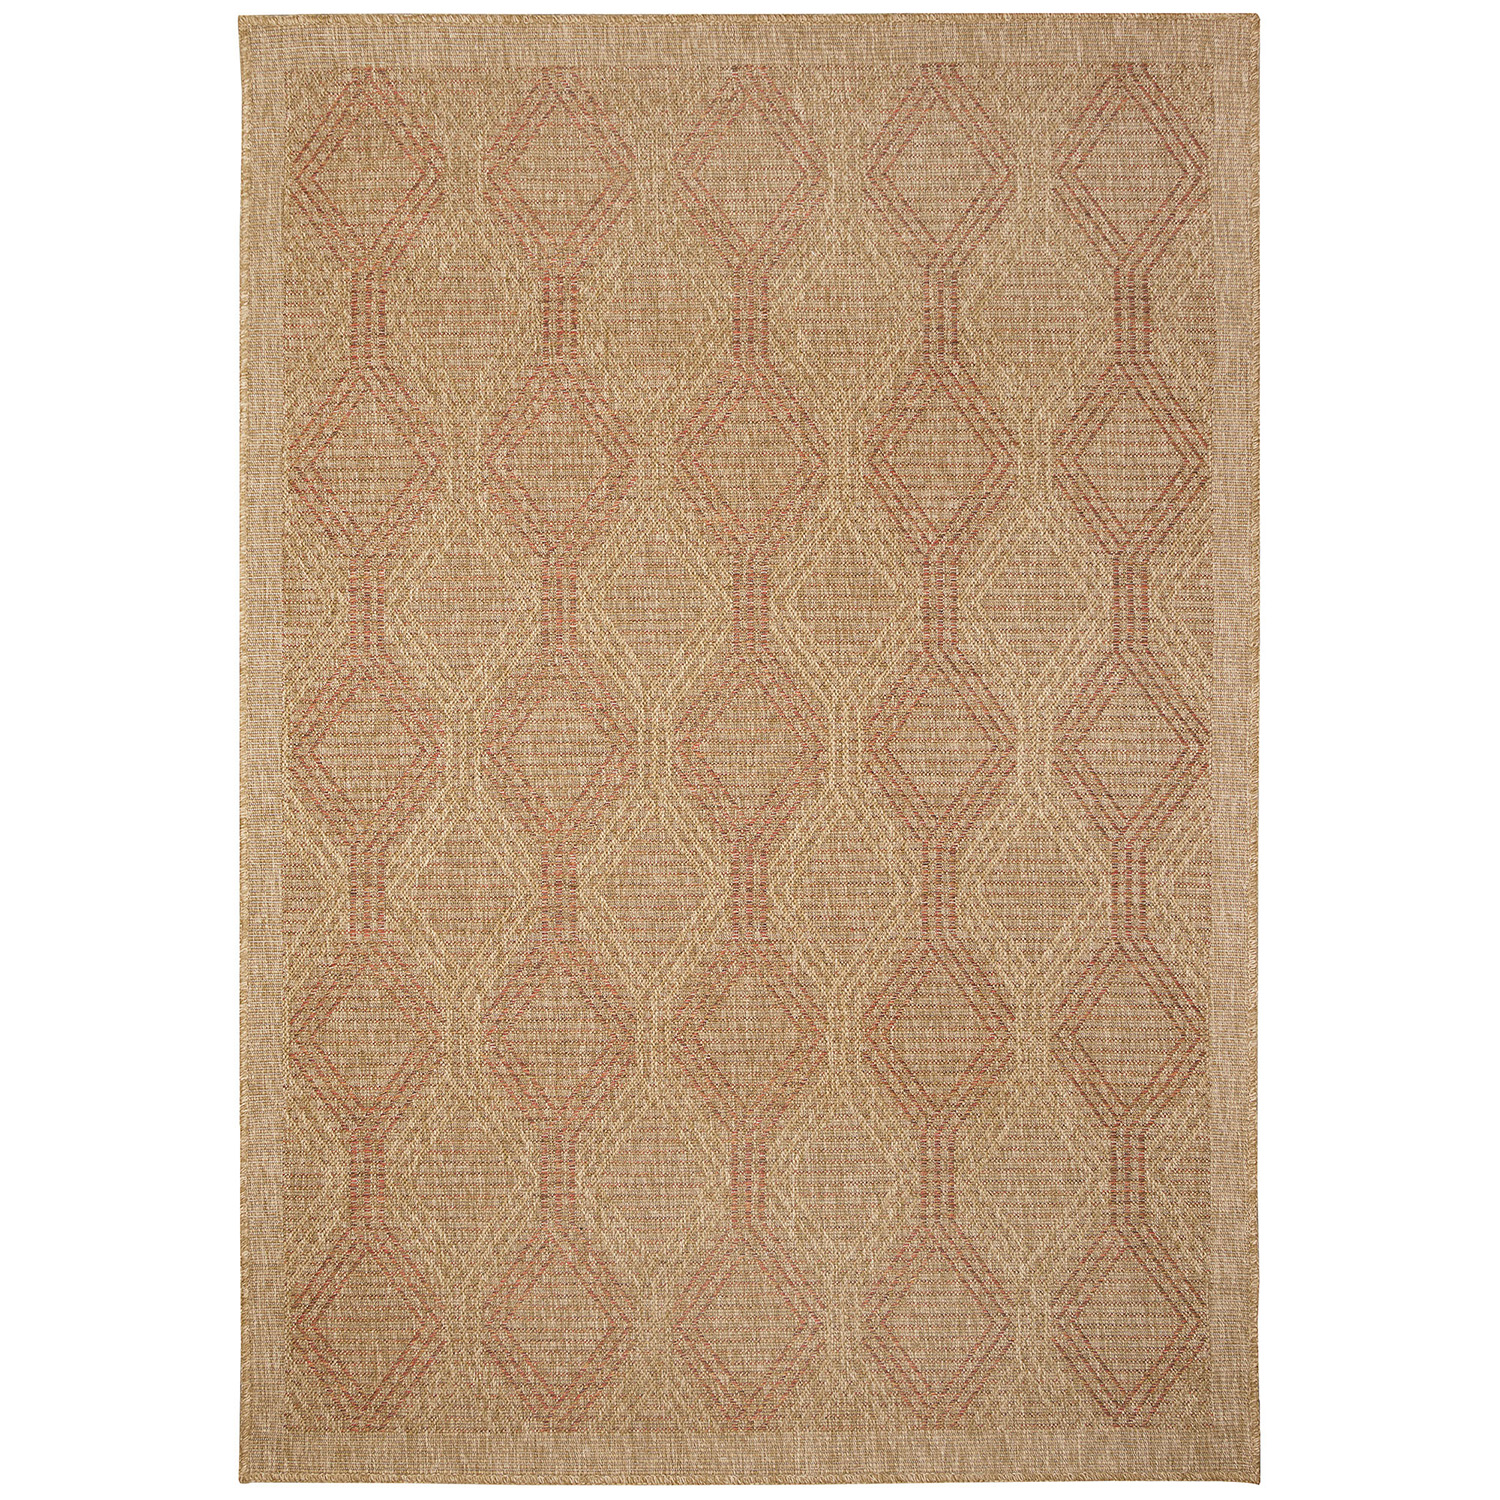 Liora Manne Sahara Low Profile  Easy Care Woven Weather Resistant Rug- Links Terracotta  Product Image